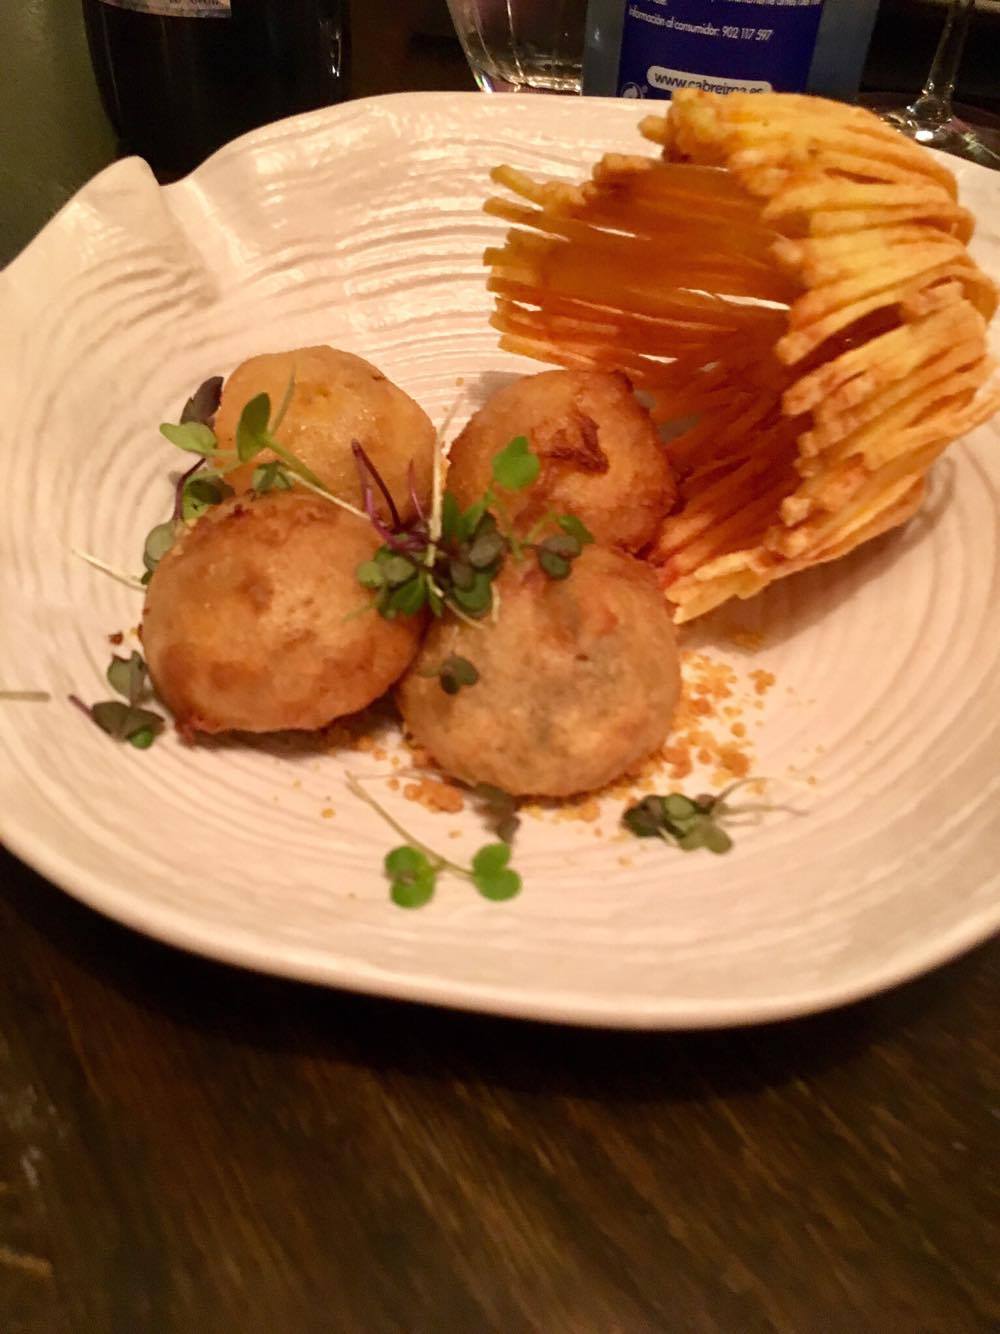 Chef's take on the omnipresent croquetas